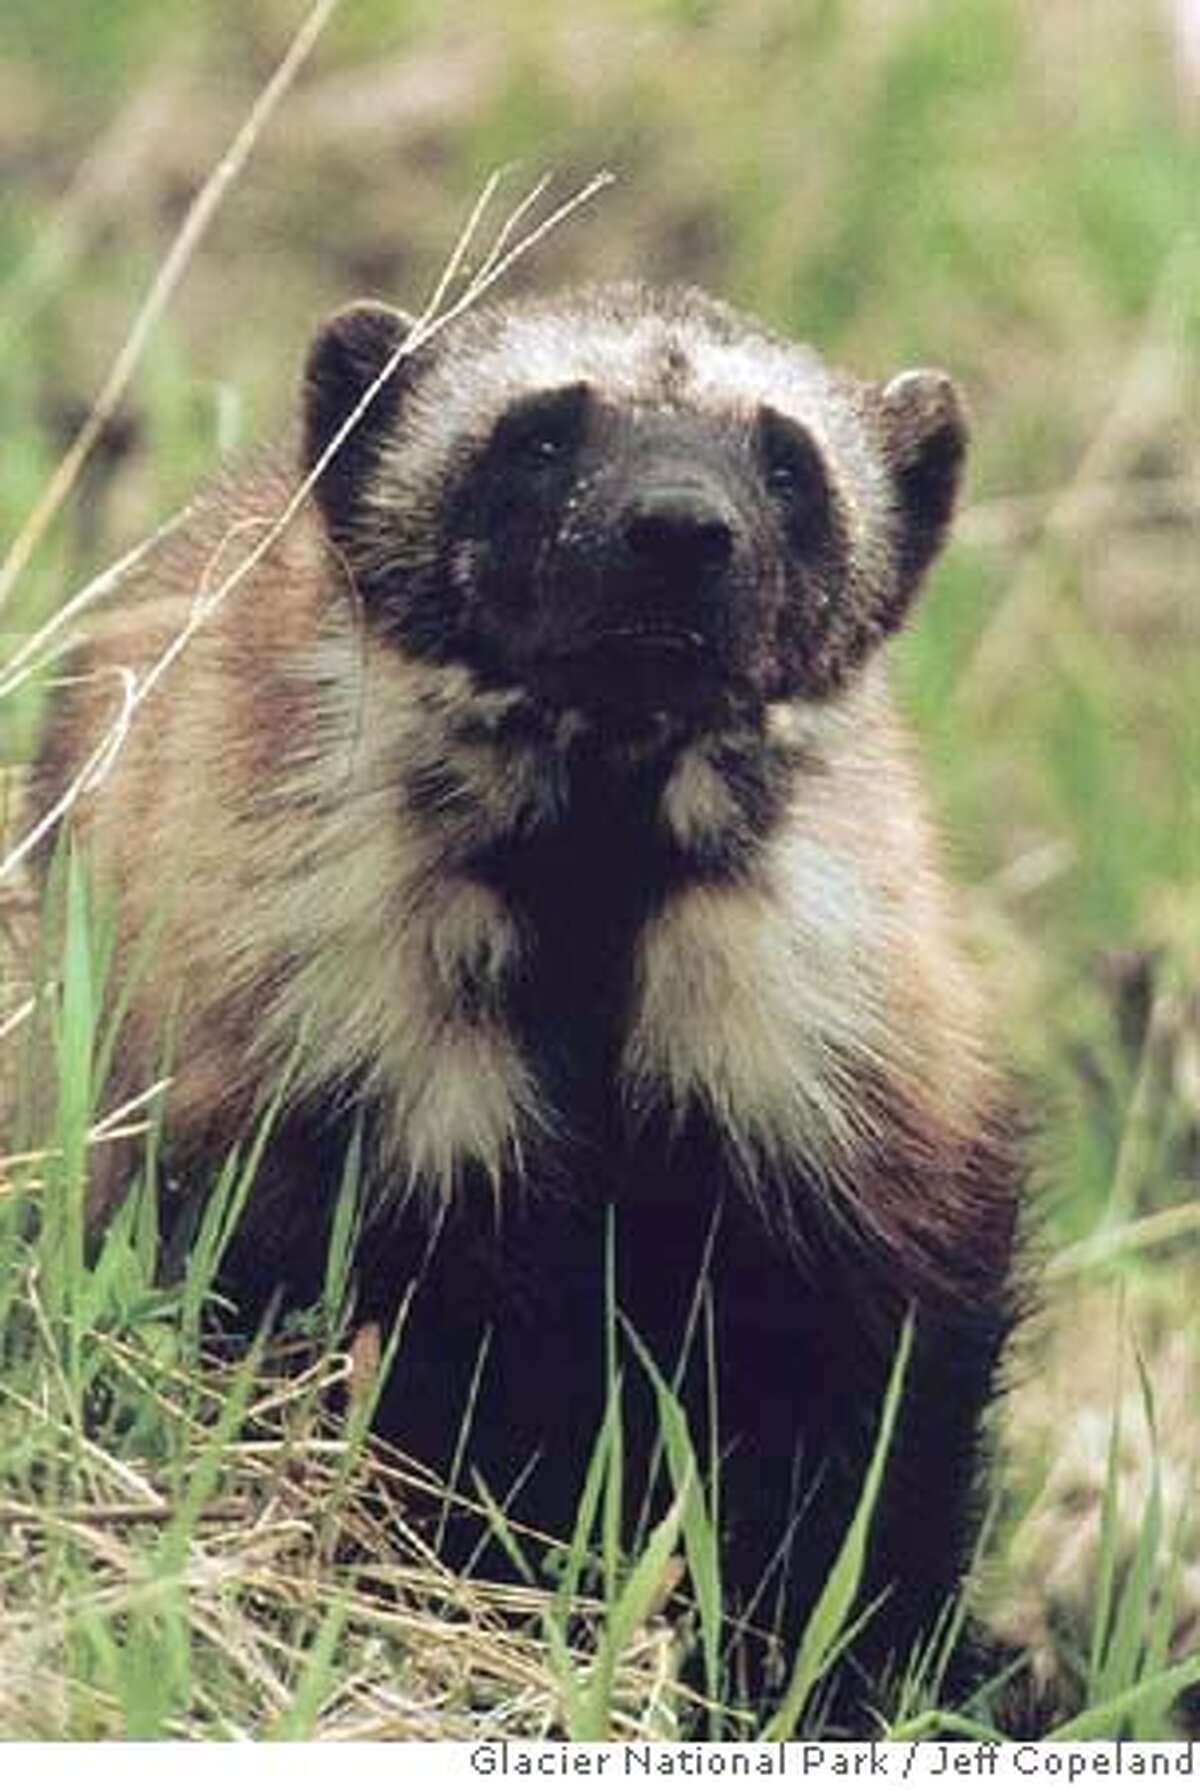 Photo has outdoors experts thinking wolverine